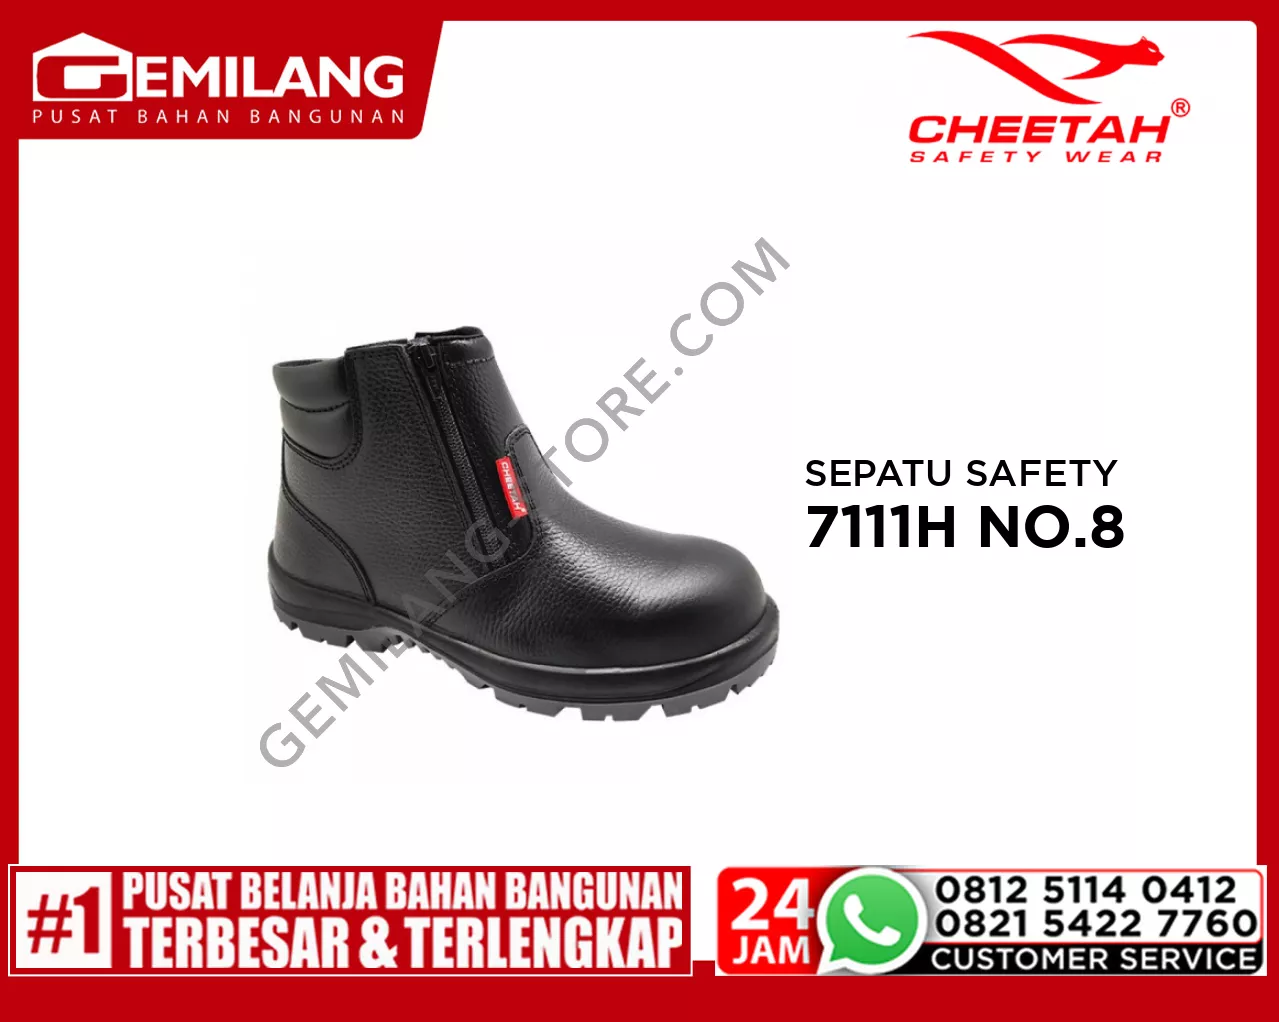 CHEETAH SEPATU SAFETY 7111H ANKLE BOOTS W/ZIPPERS NO.8